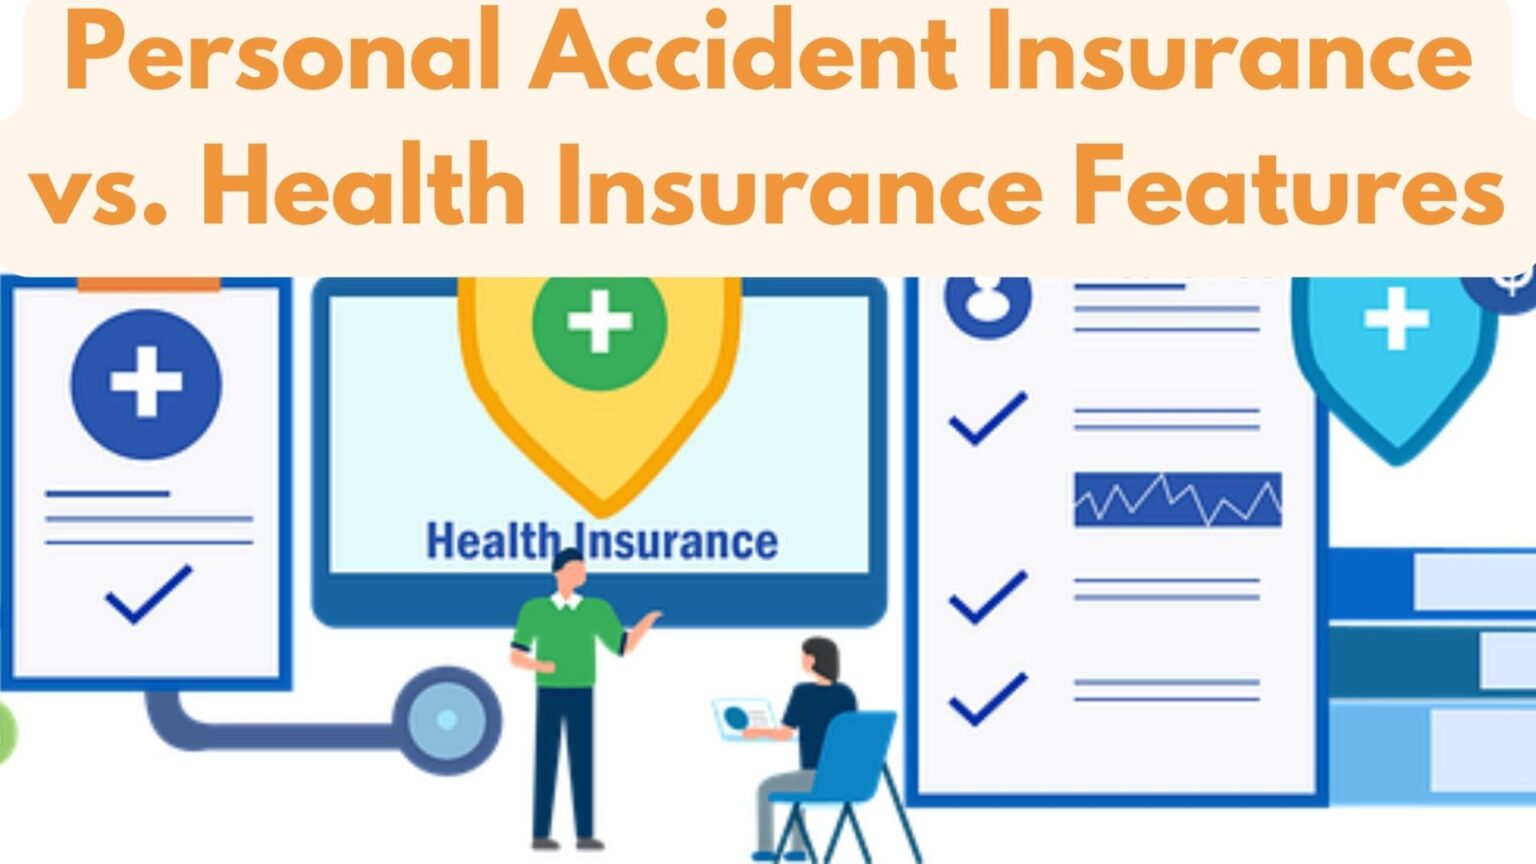 Personal Accident Insurance vs. Health Insurance Features